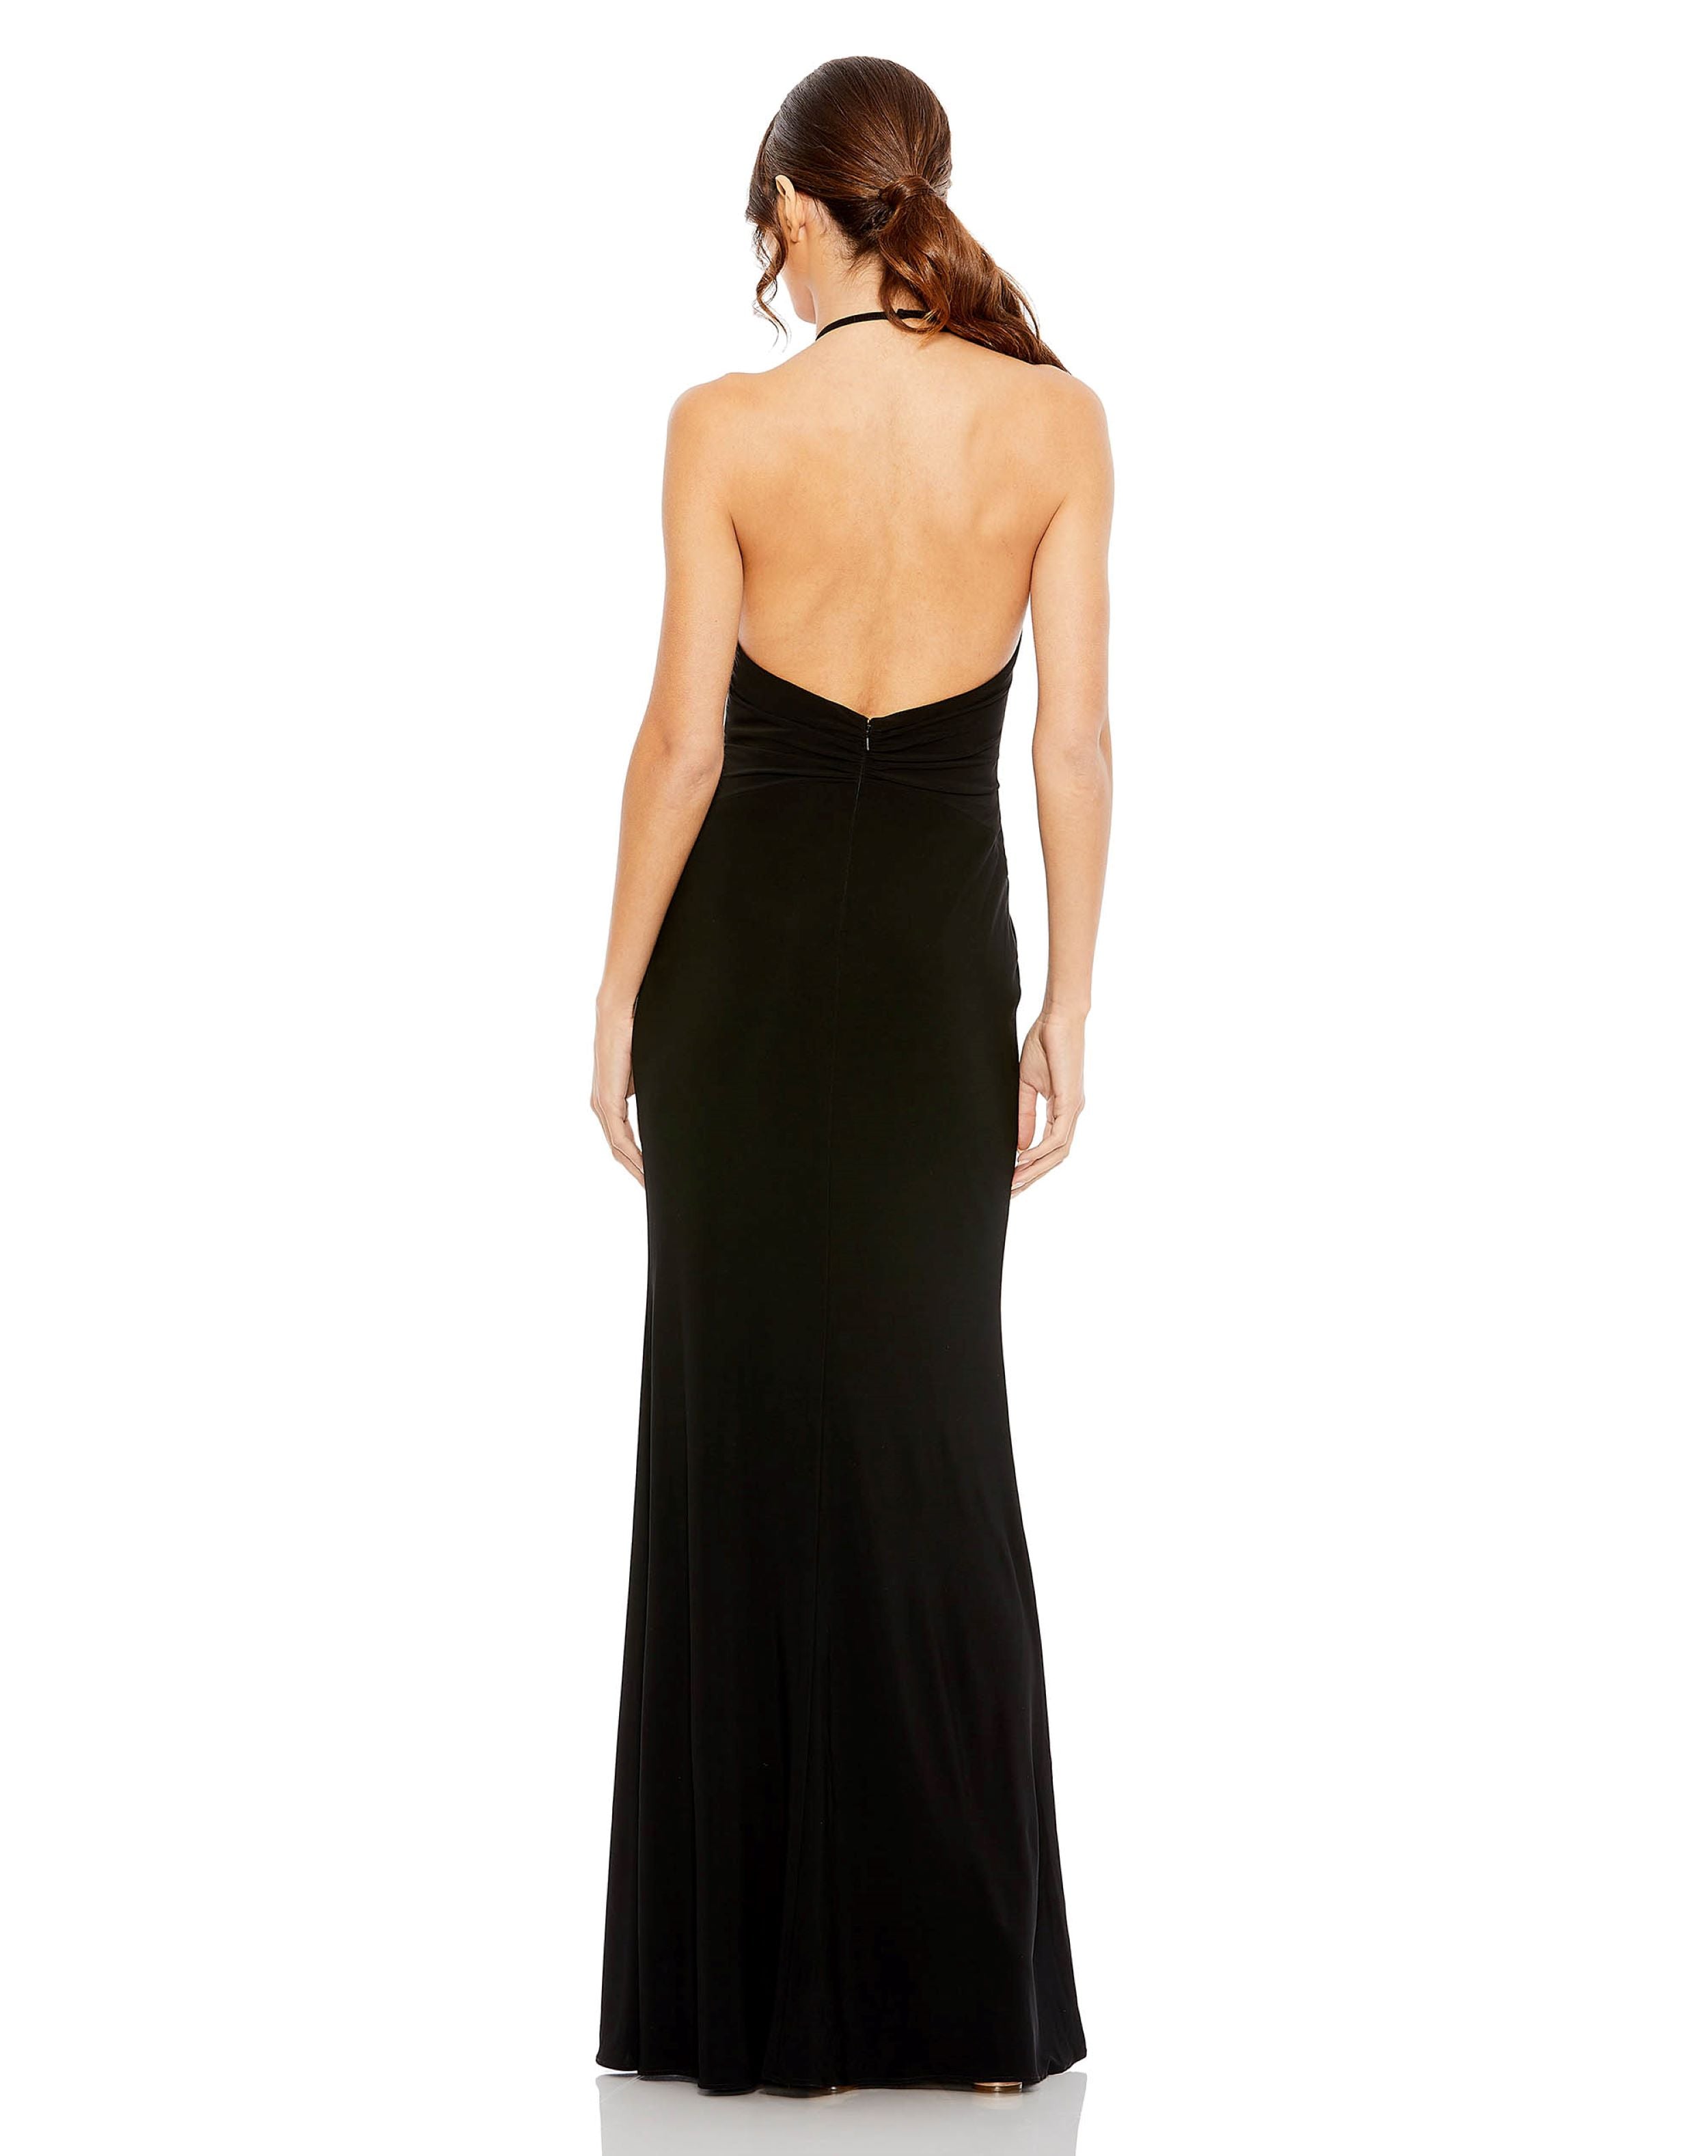 High Neck Cut Out Gown